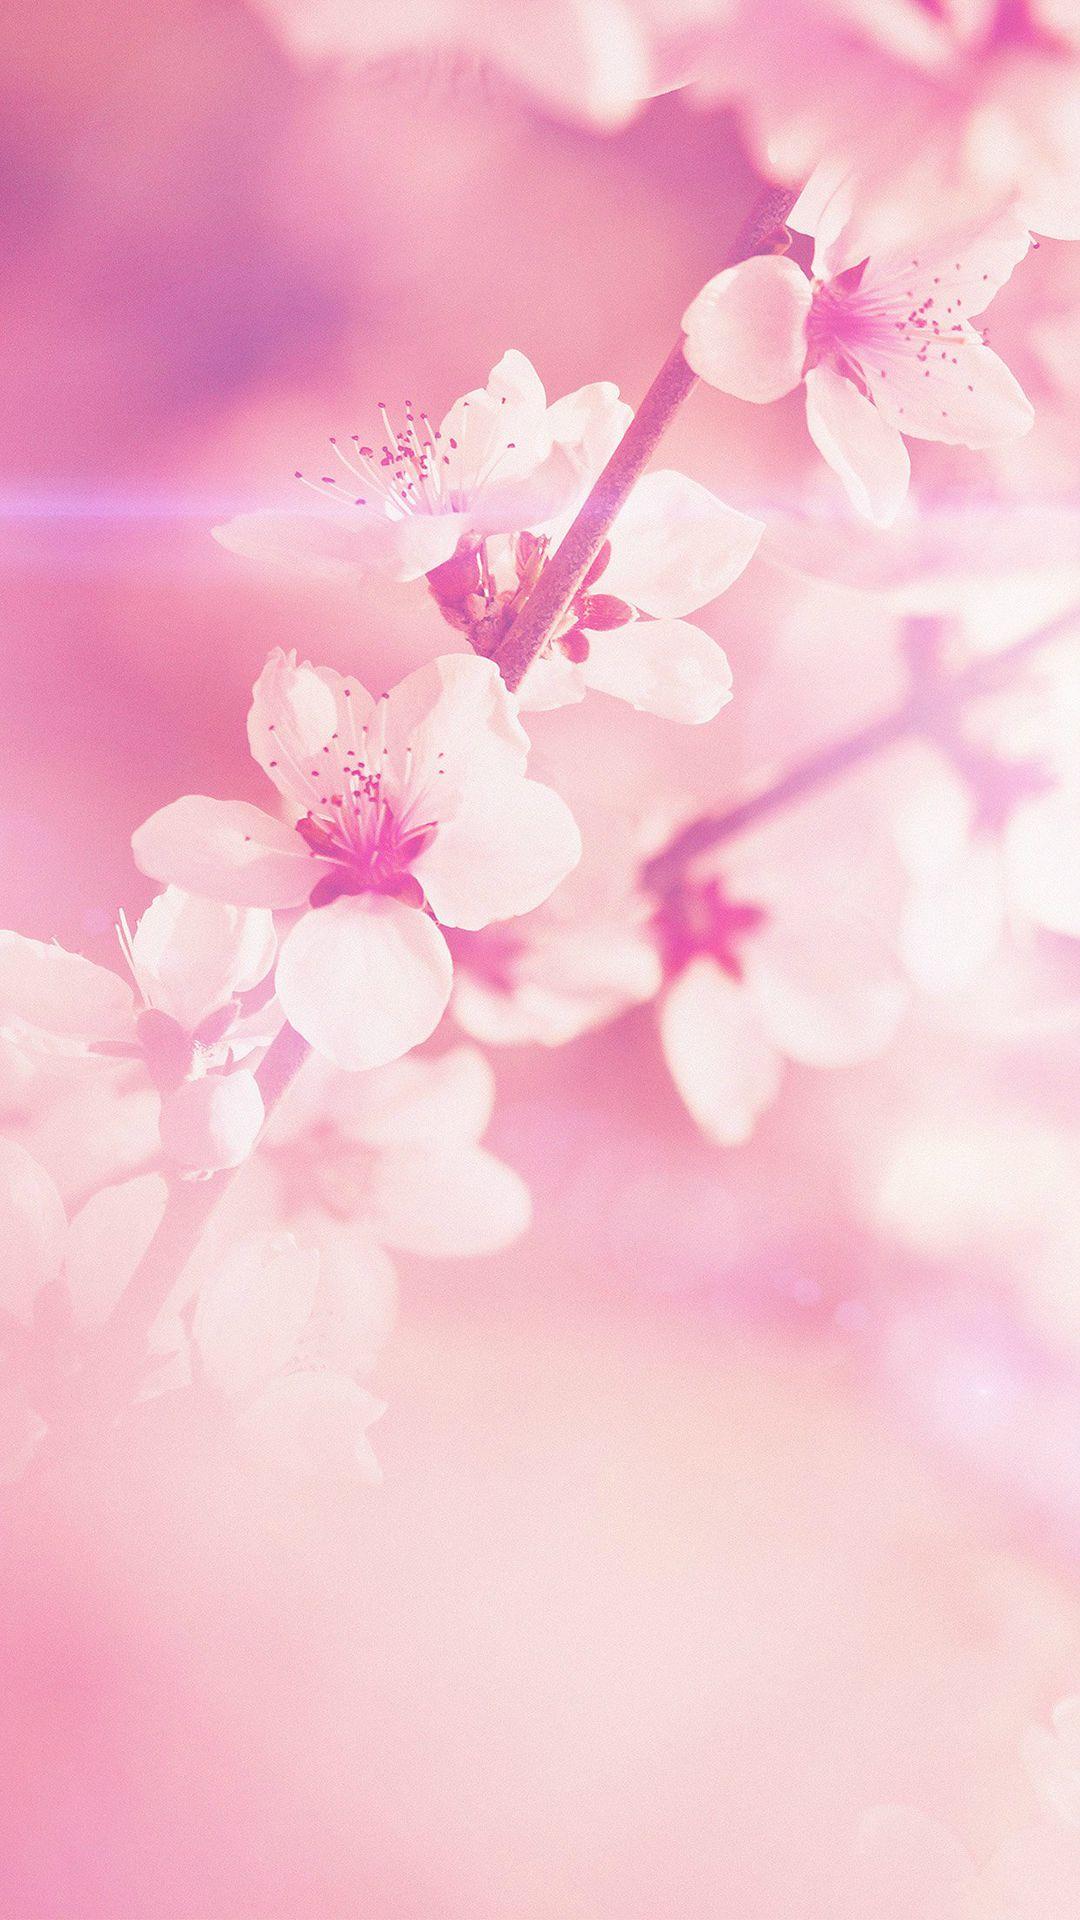 Light Pink Floral Iphone Wallpapers Top Free Light Pink Floral